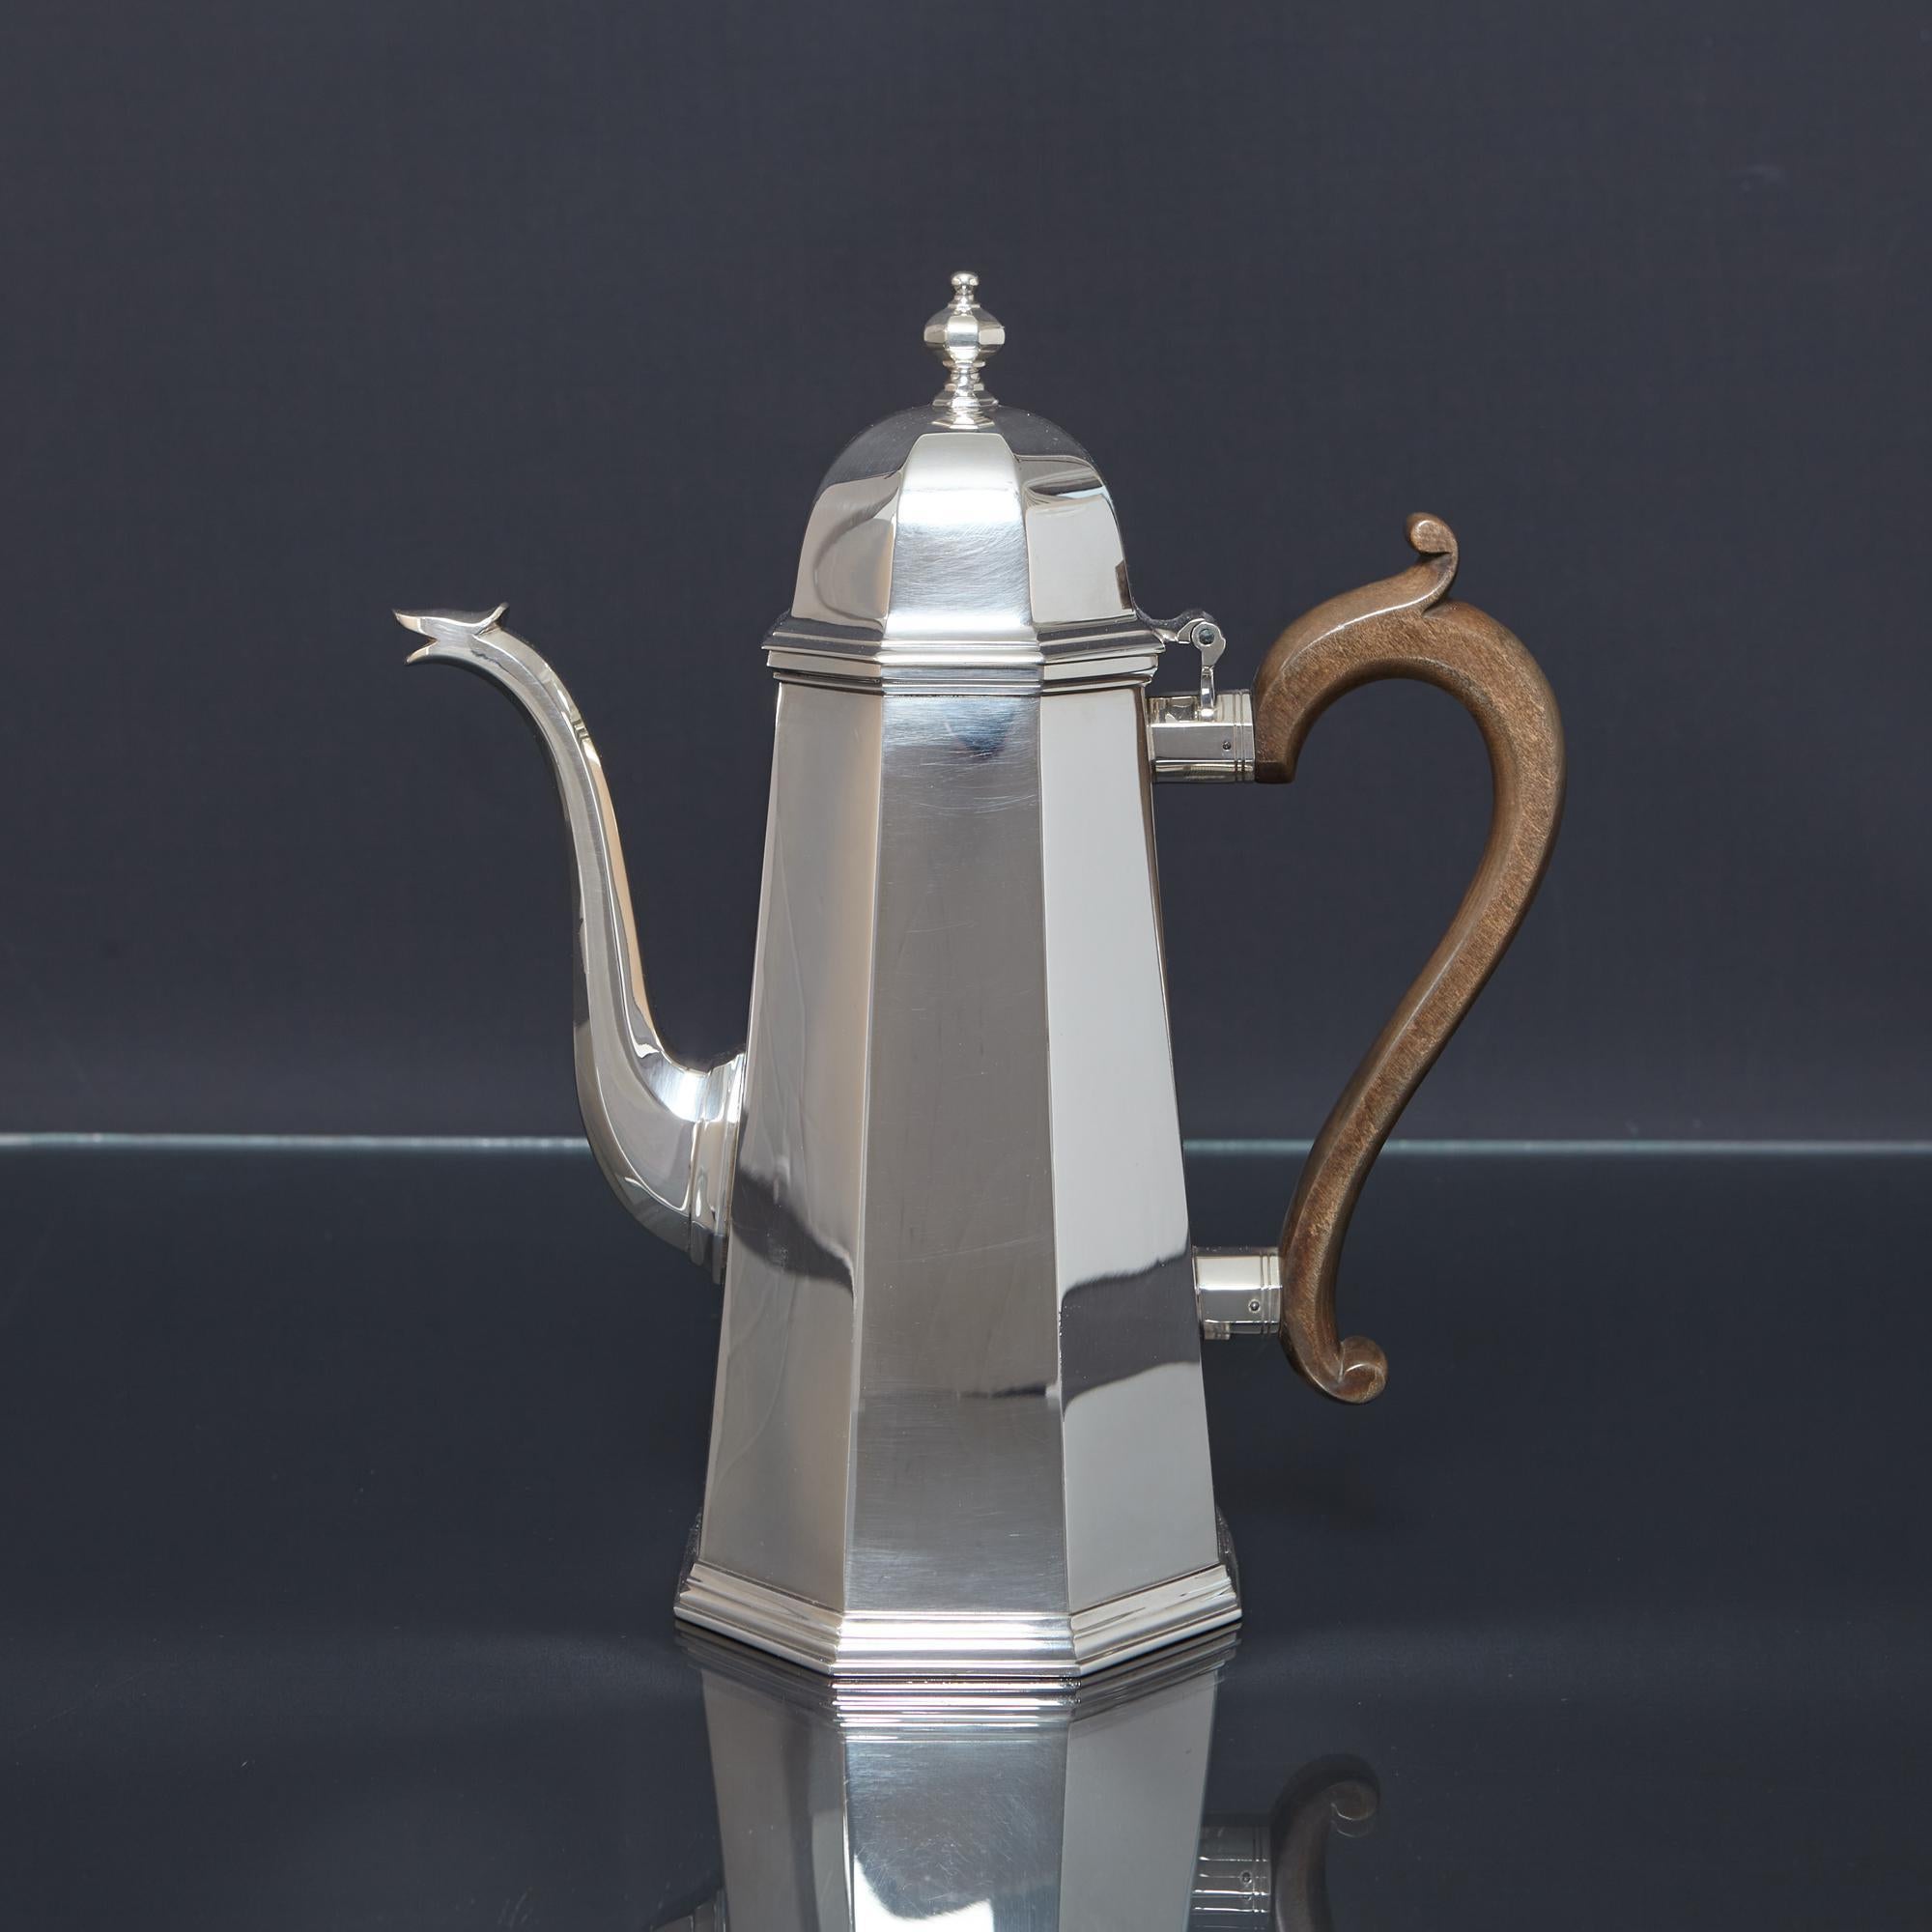 A superb quality, silver coffee pot in the Queen Anne style, determined by its octagonal body and panelled swan neck silver spout. The octagonal hinged lid is surmounted by a panelled finial and there is an applied stepped decoration about the base,